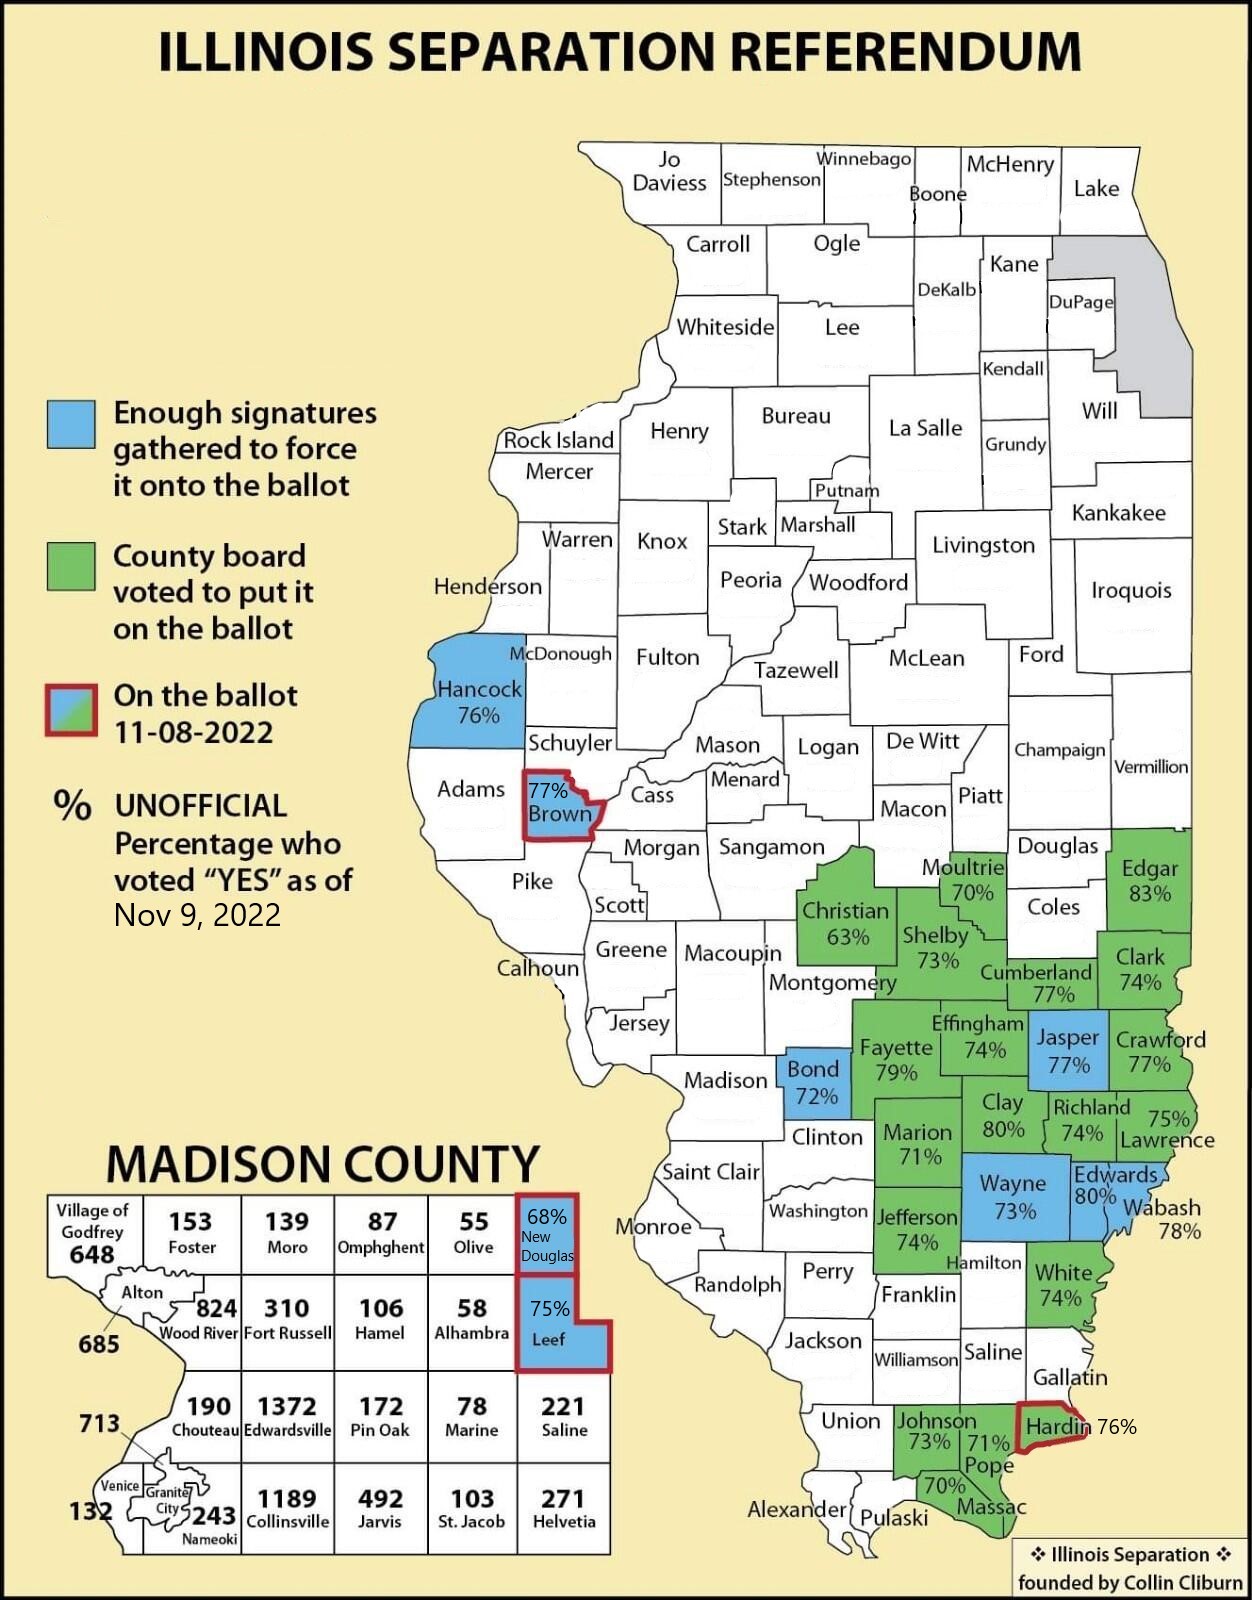 27 Illinois Counties Have Voted to Split the State